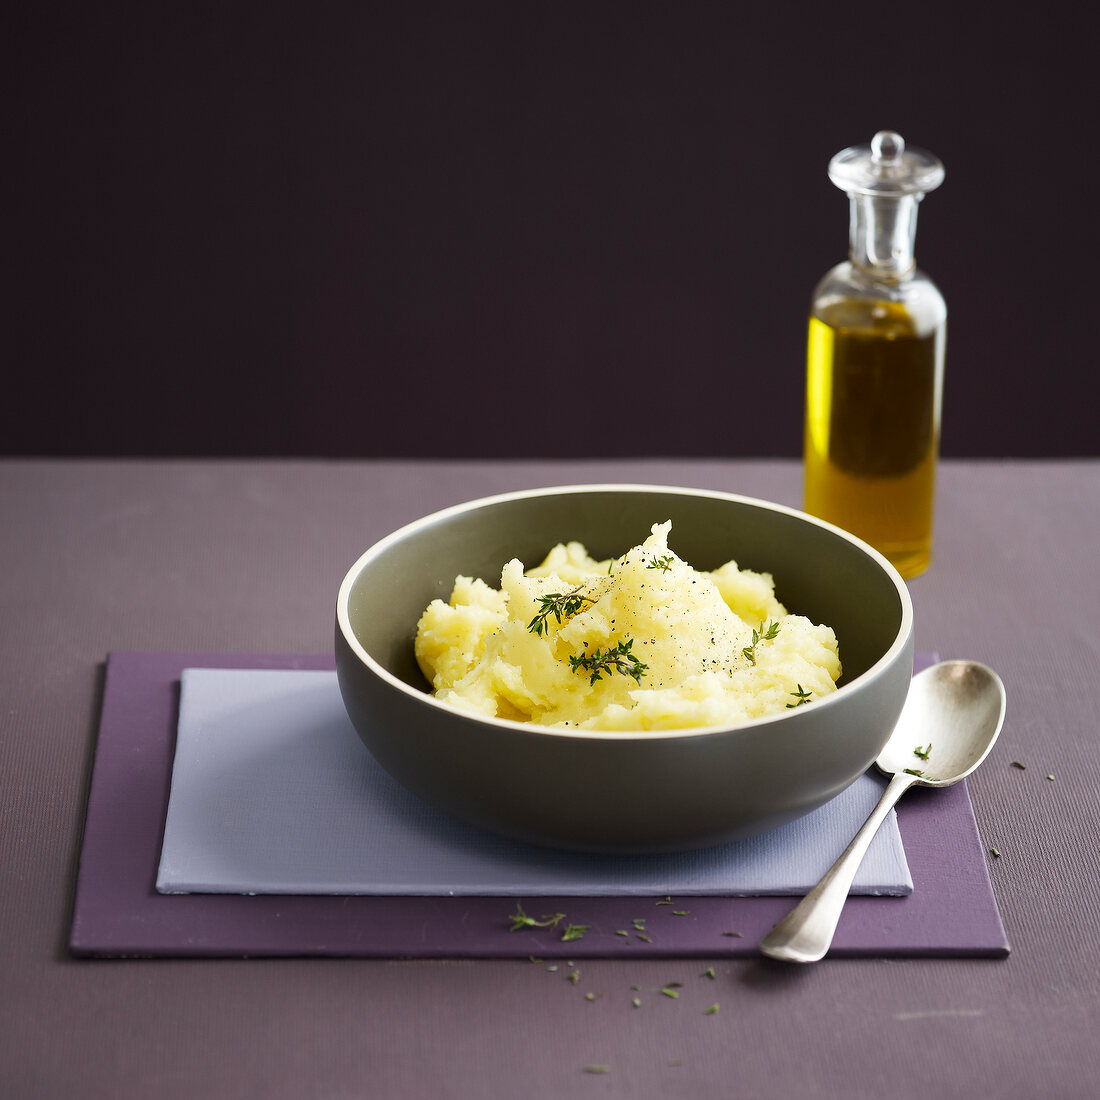 Mashed potatoes with olive oil